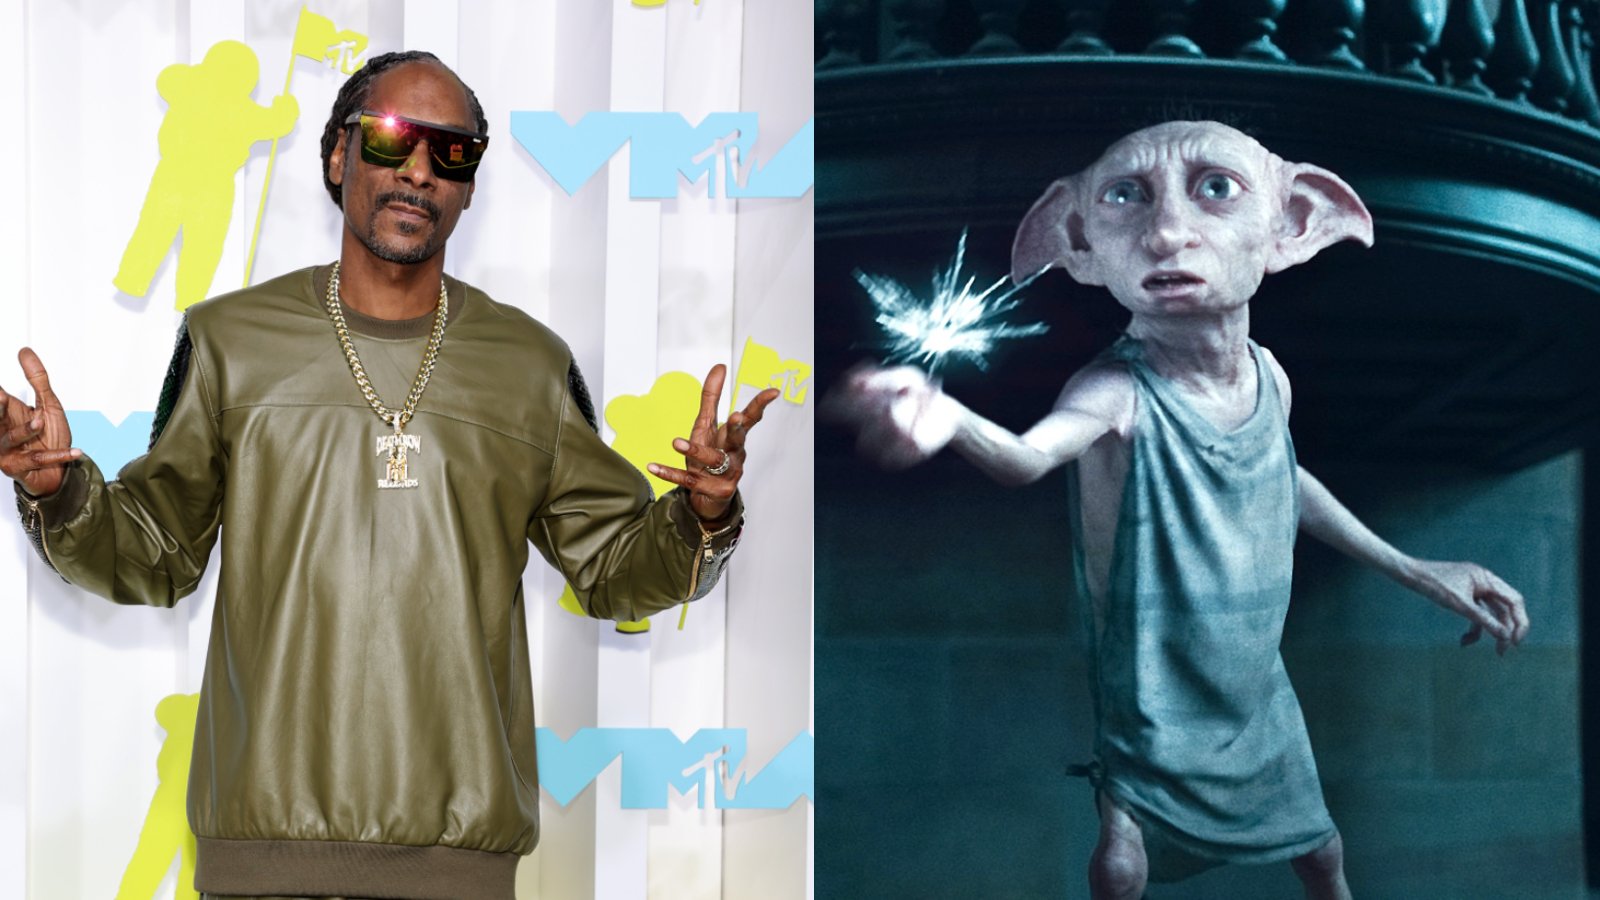 ‘Harry Potter’ star would have loved to ‘chill out’ with Snoop Dogg’s nightmarish Dobby